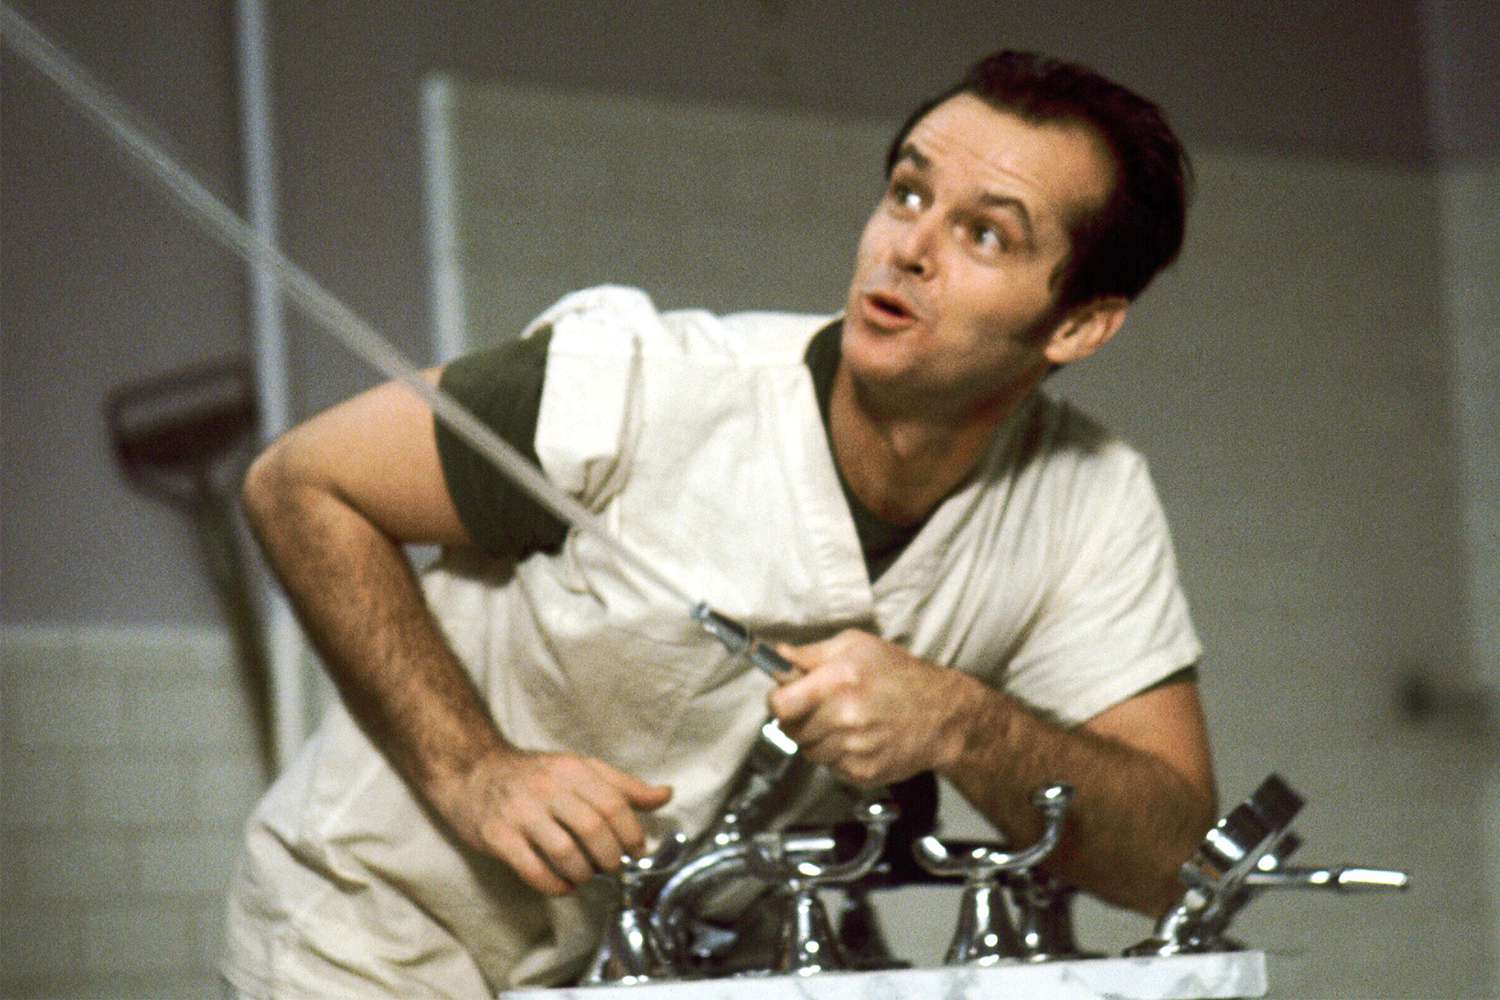 American actor Jack Nicholson as Randle McMurphy in 'One Flew Over The Cuckoo's Nest', directed by Milos Forman, 1975. (Photo by Silver Screen Collection/Getty Images)